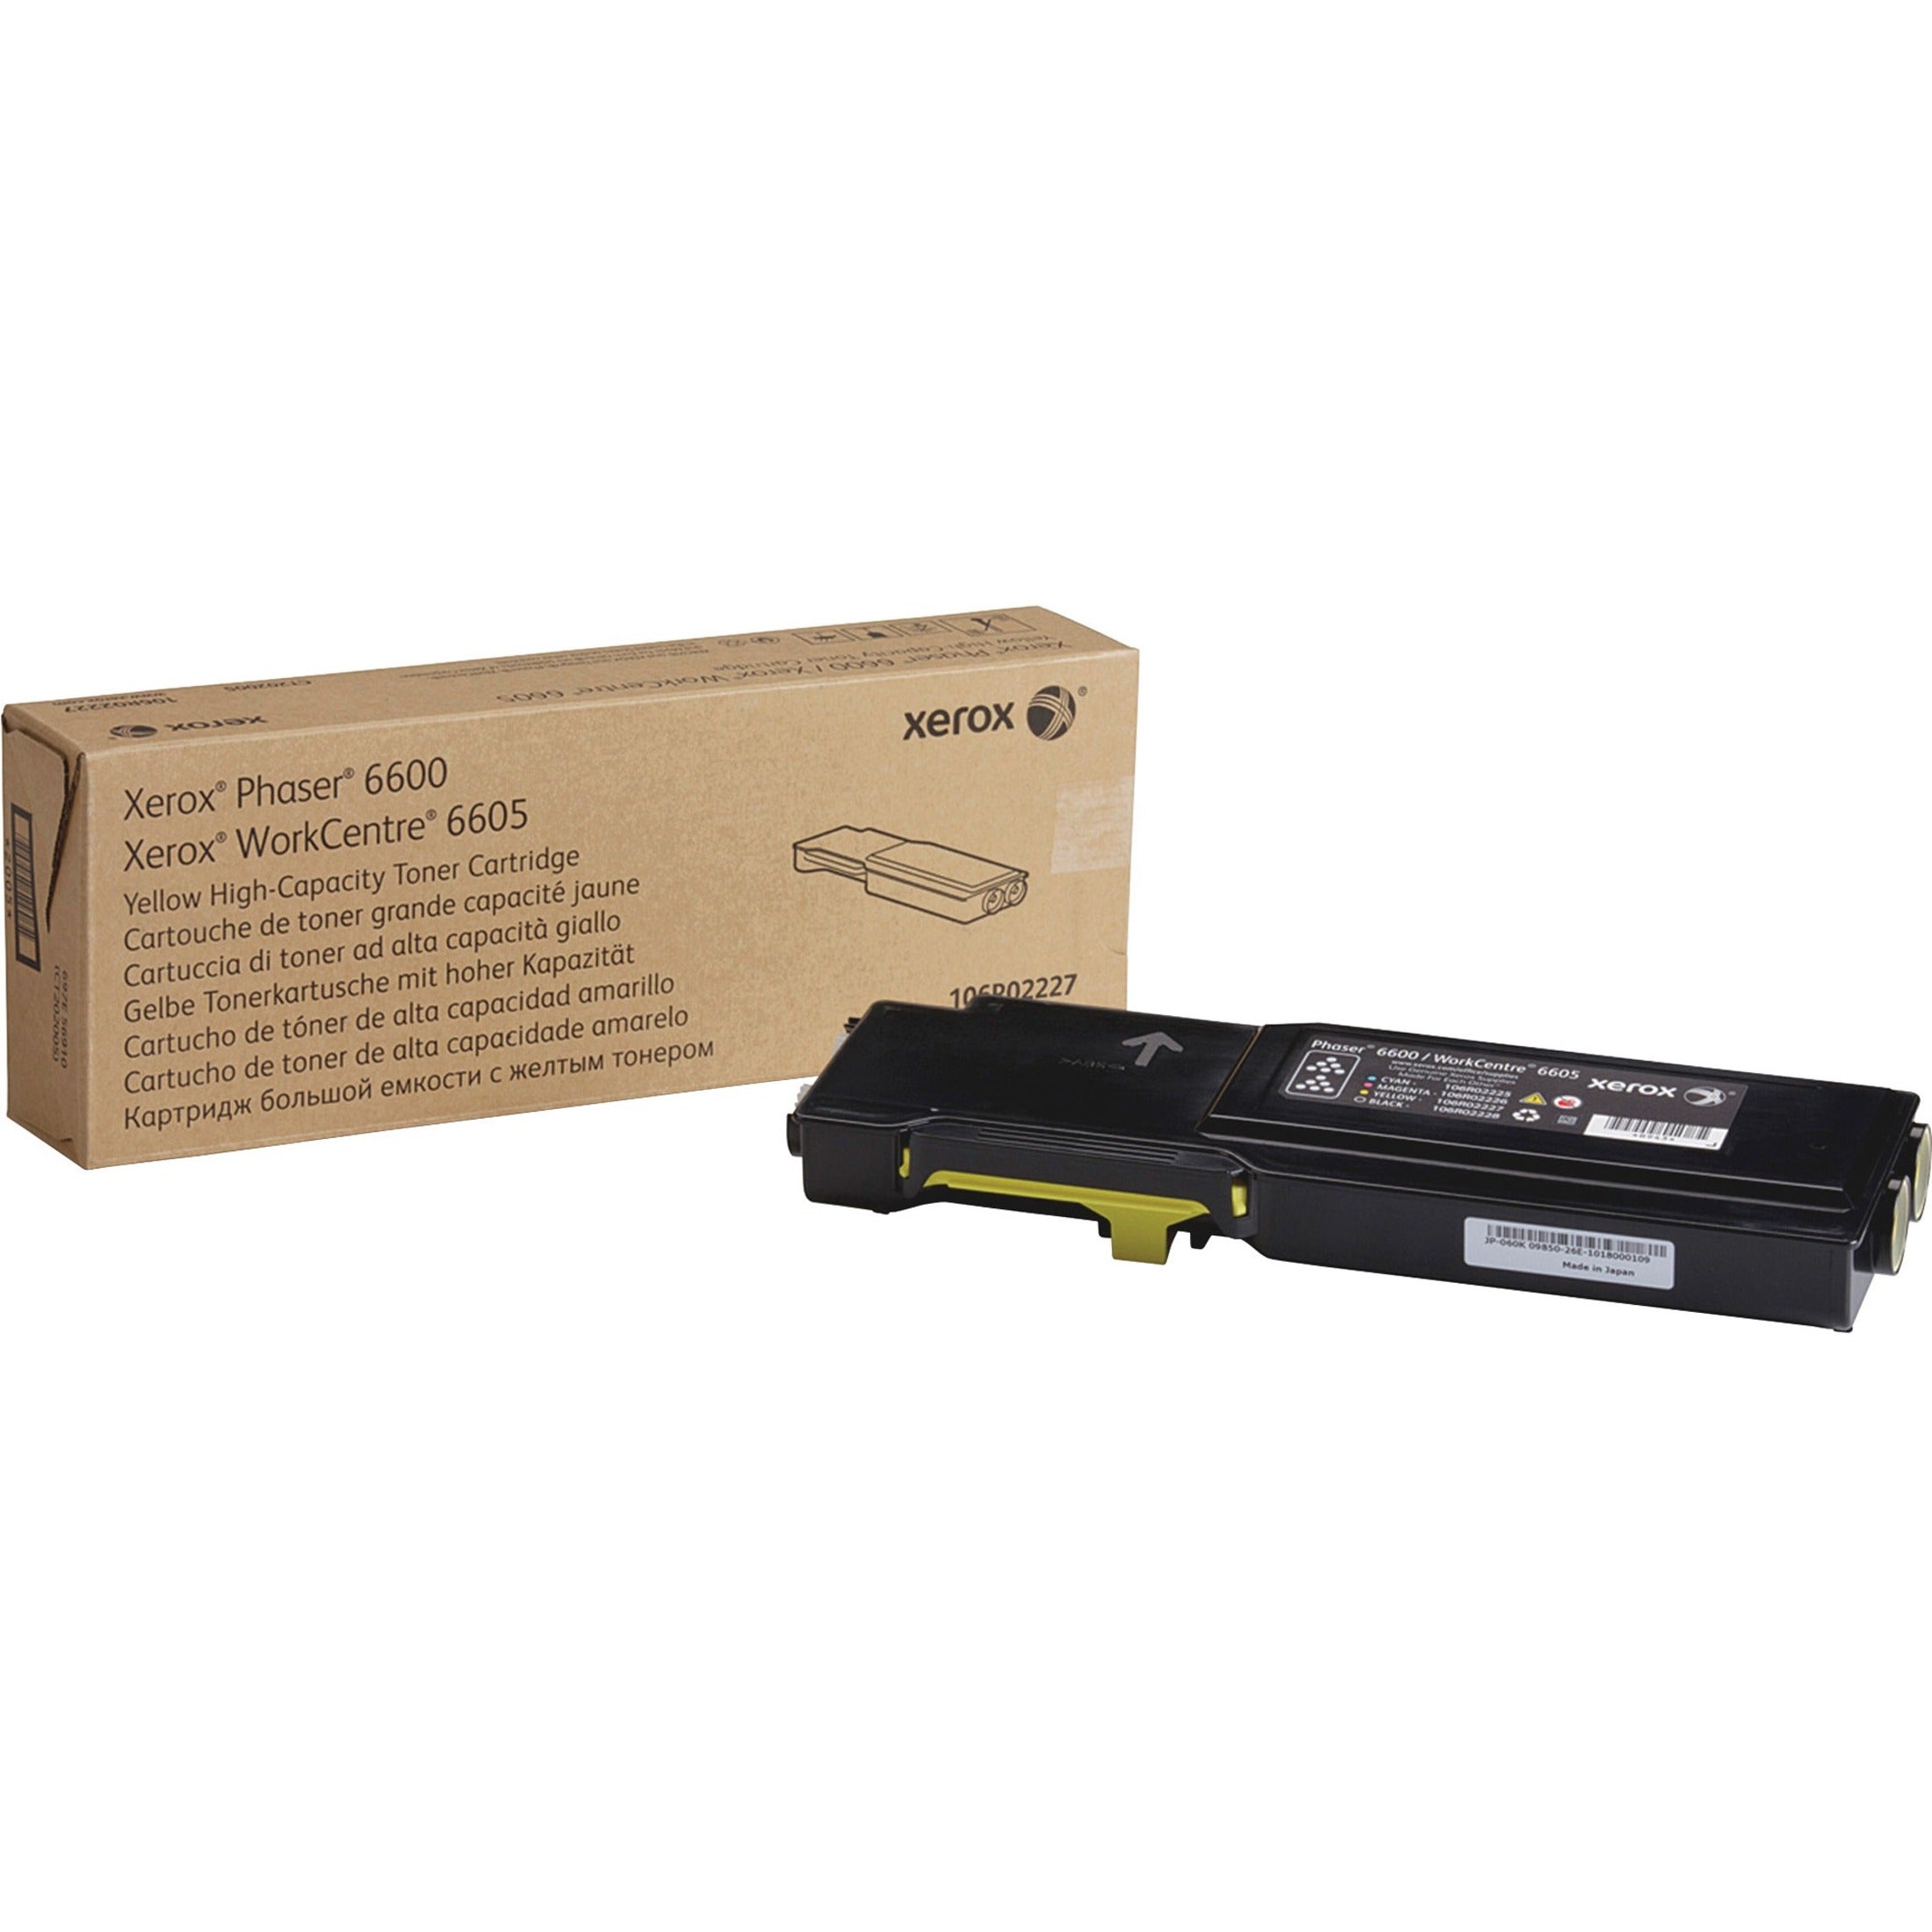 Xerox 106R02227 Phaser 6600/WorkCentre 6605 High Capacity Toner Cartridge, Yellow, 6,000 Pages Yield